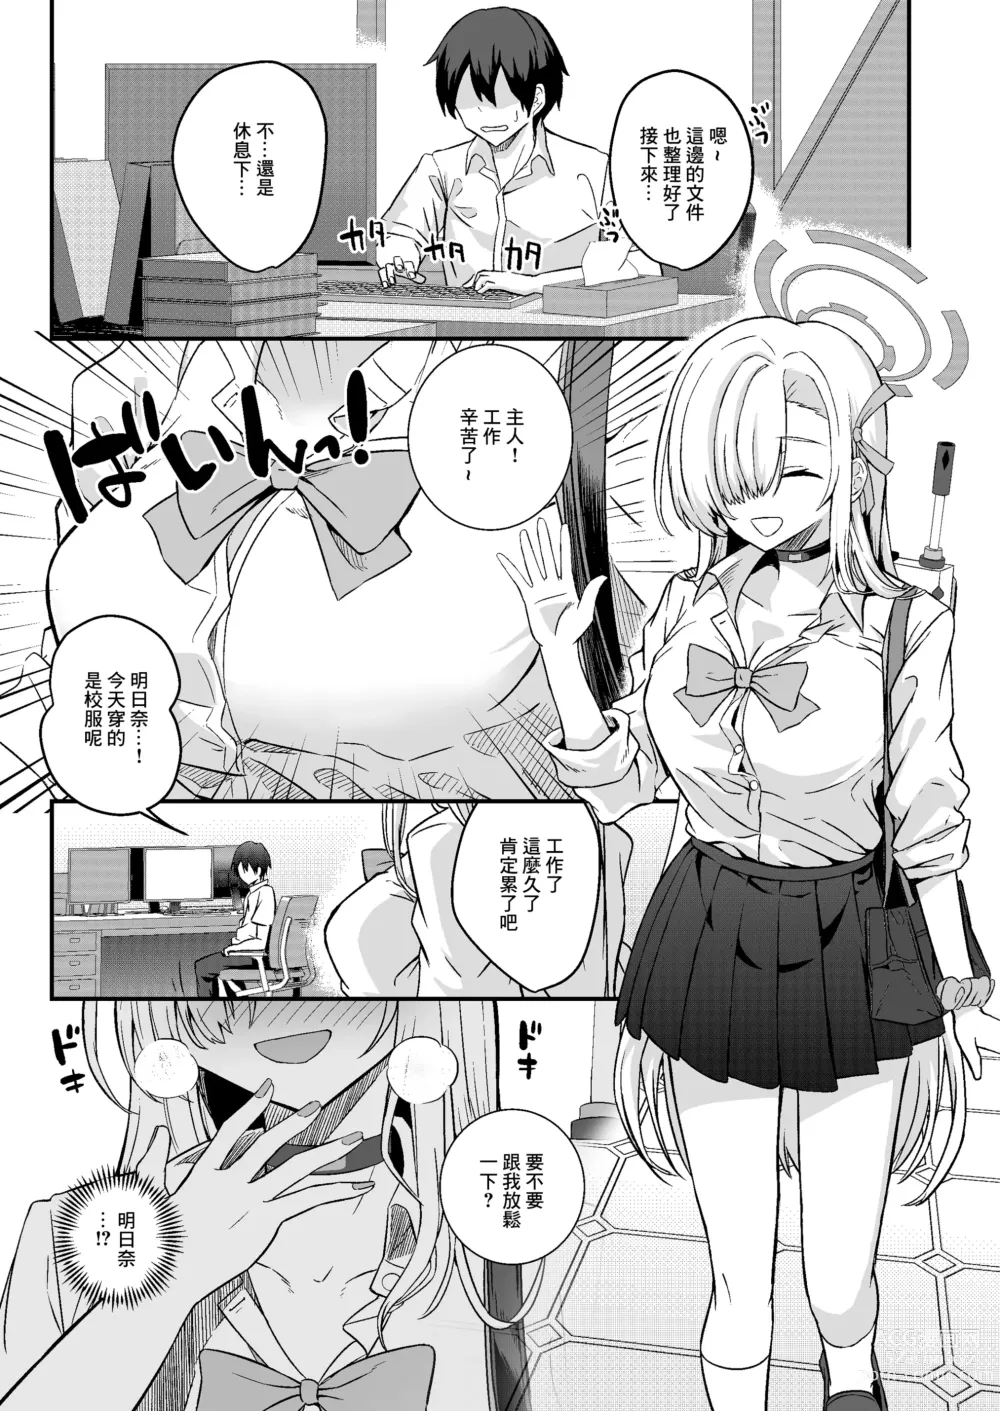 Page 2 of doujinshi 和明日奈舌吻做愛吧!